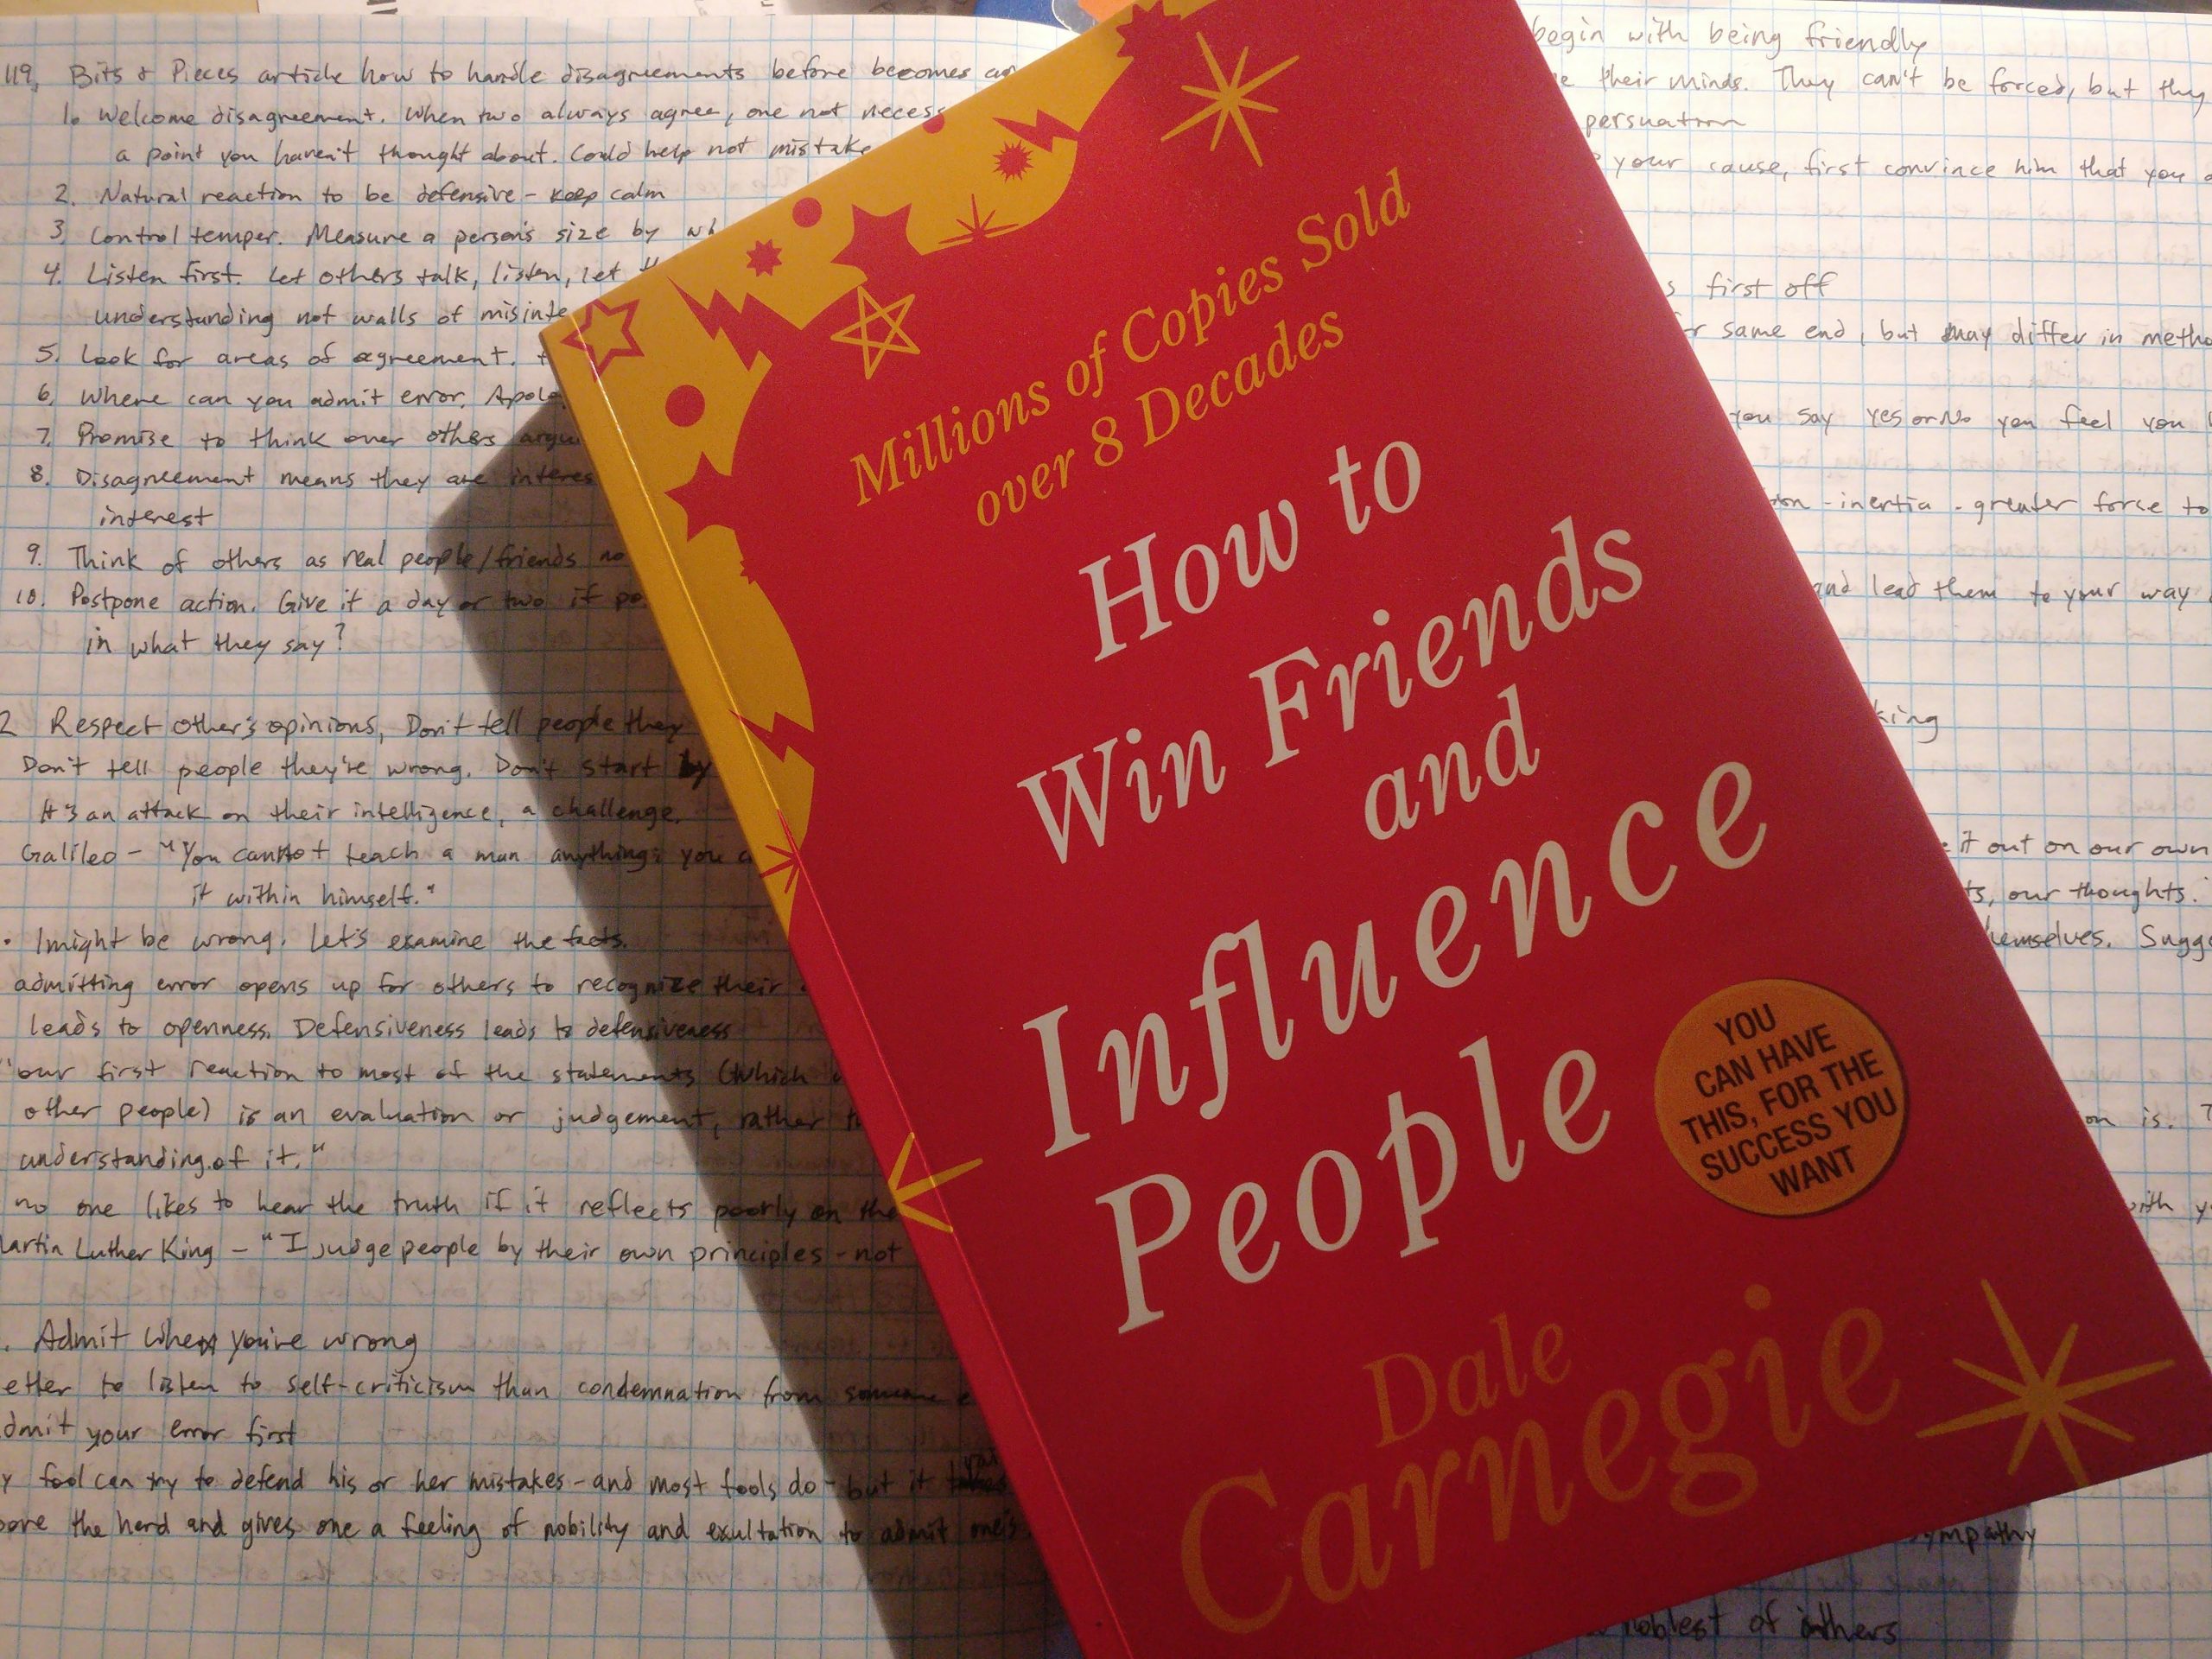 How To Win Friends and Influence People by Dale Carnegie [REVISED HARD